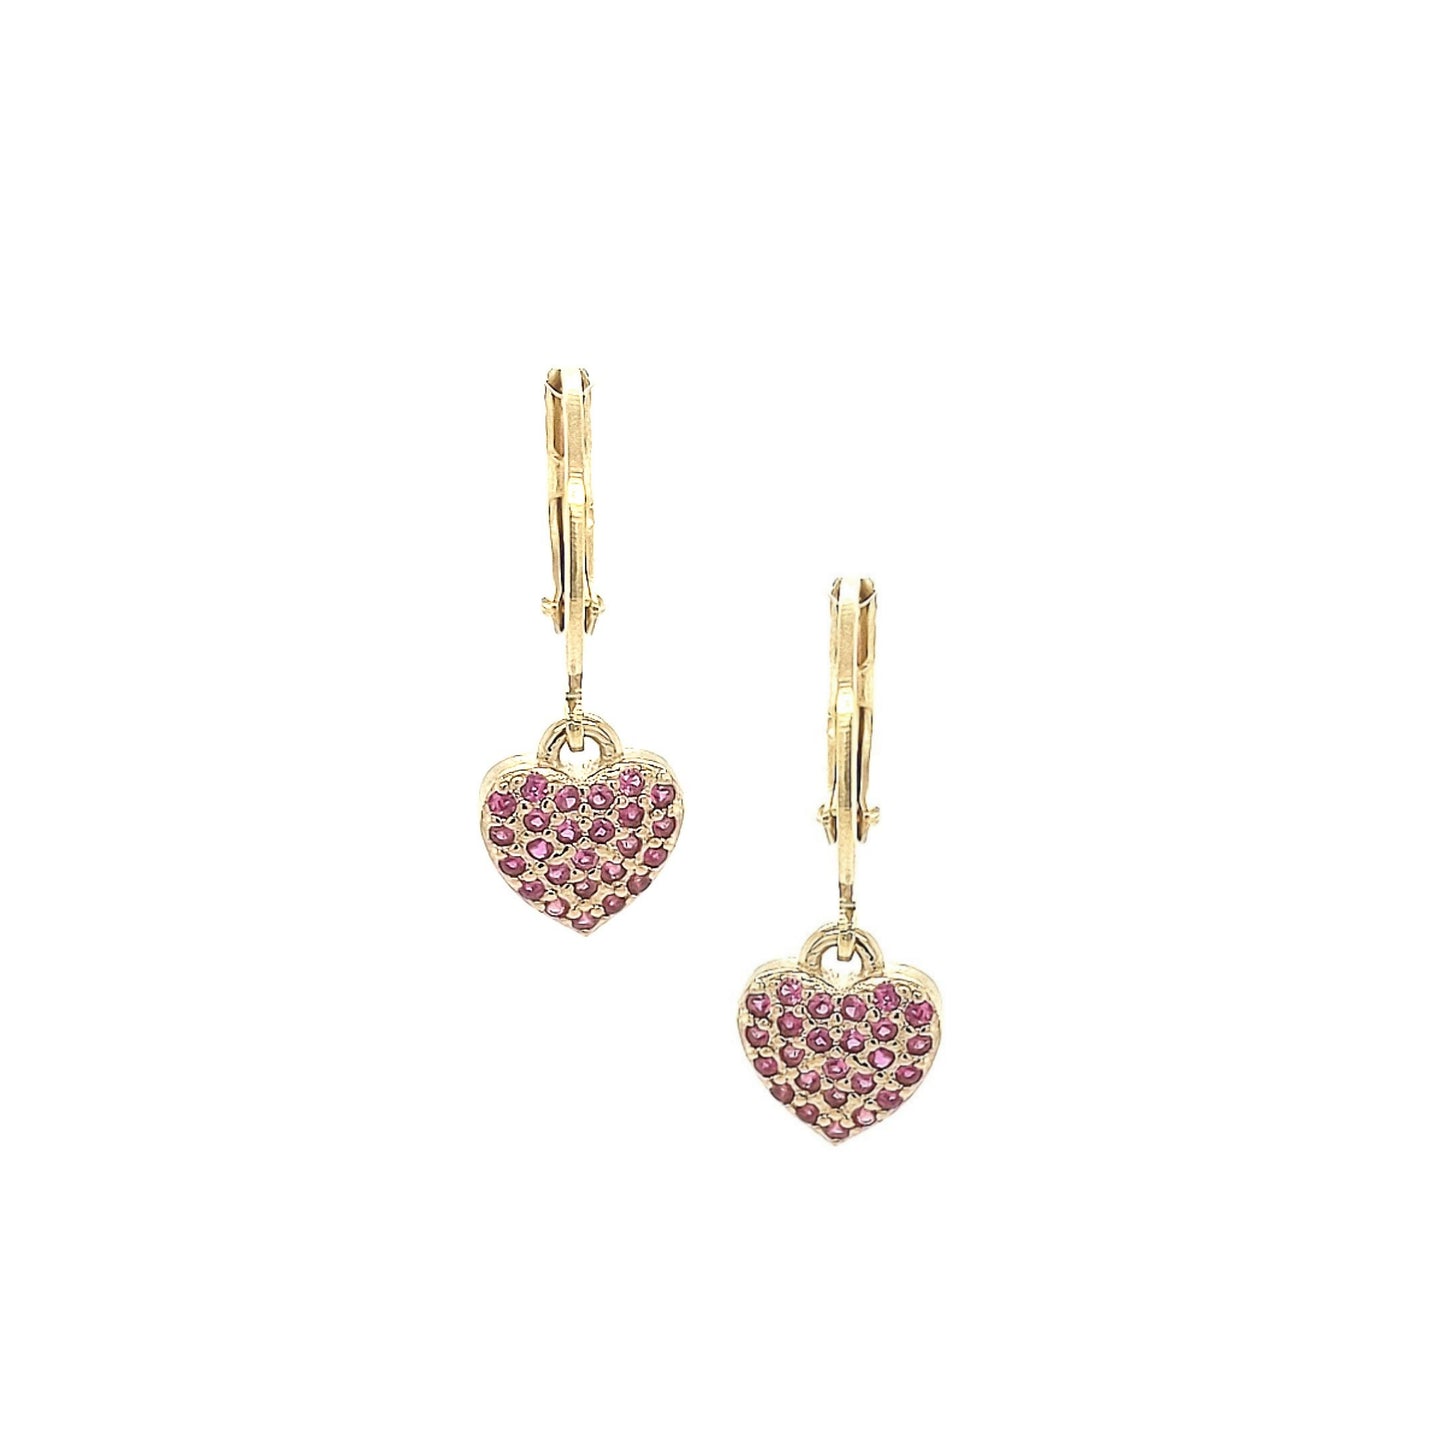 Surgical Steel Heart And CZ Earrings - HK Jewels